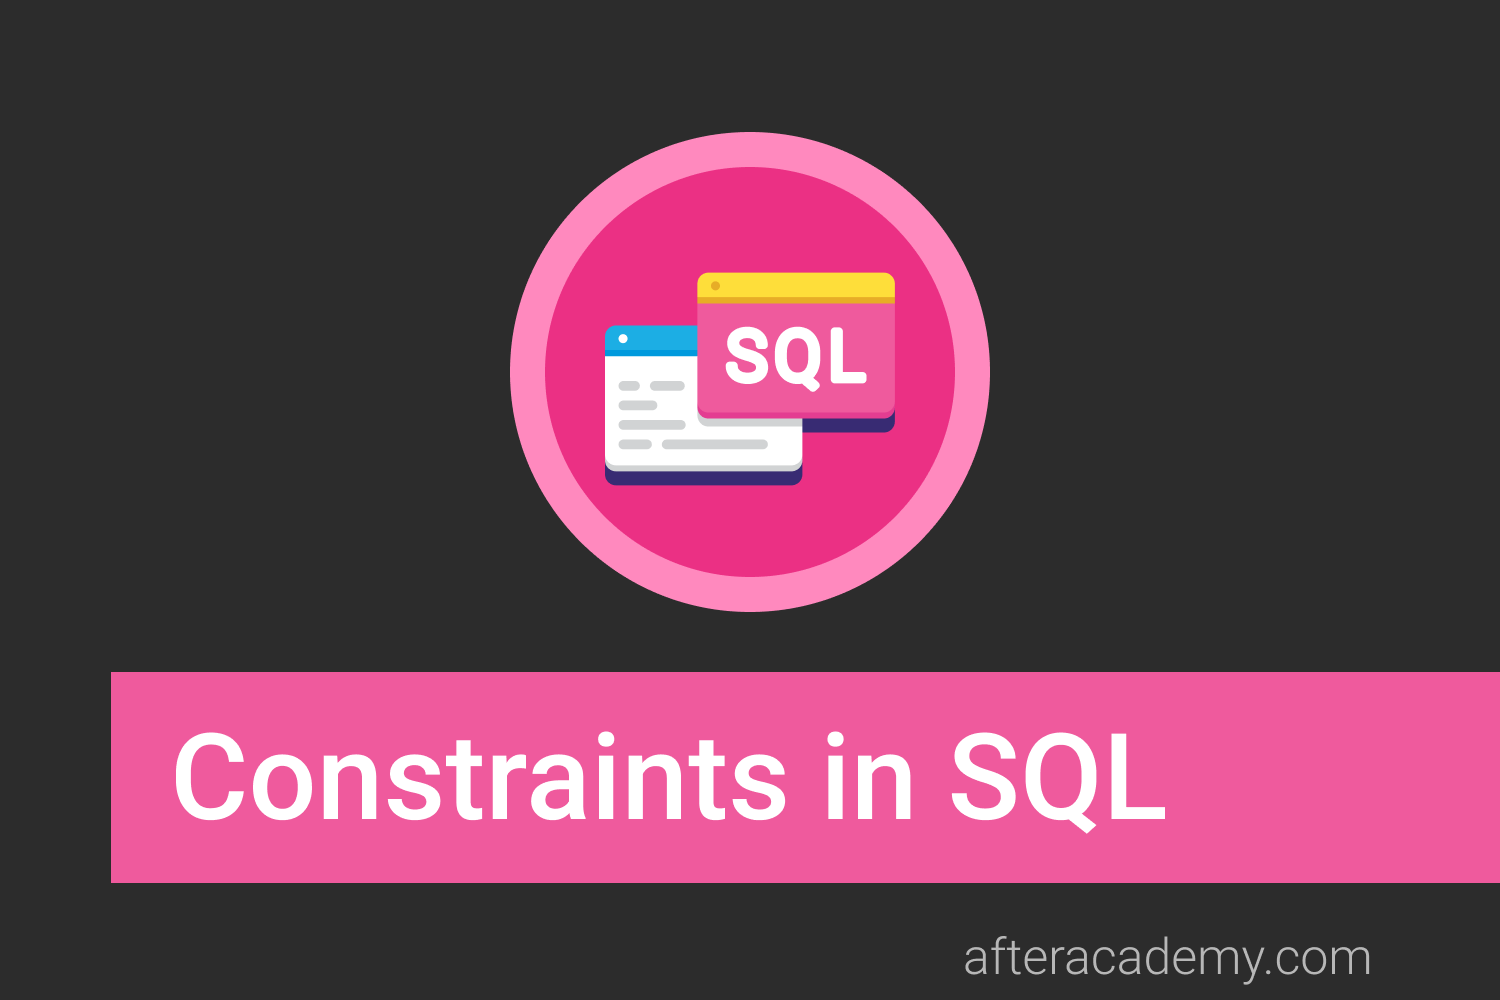 What are the various types of constraints in SQL?